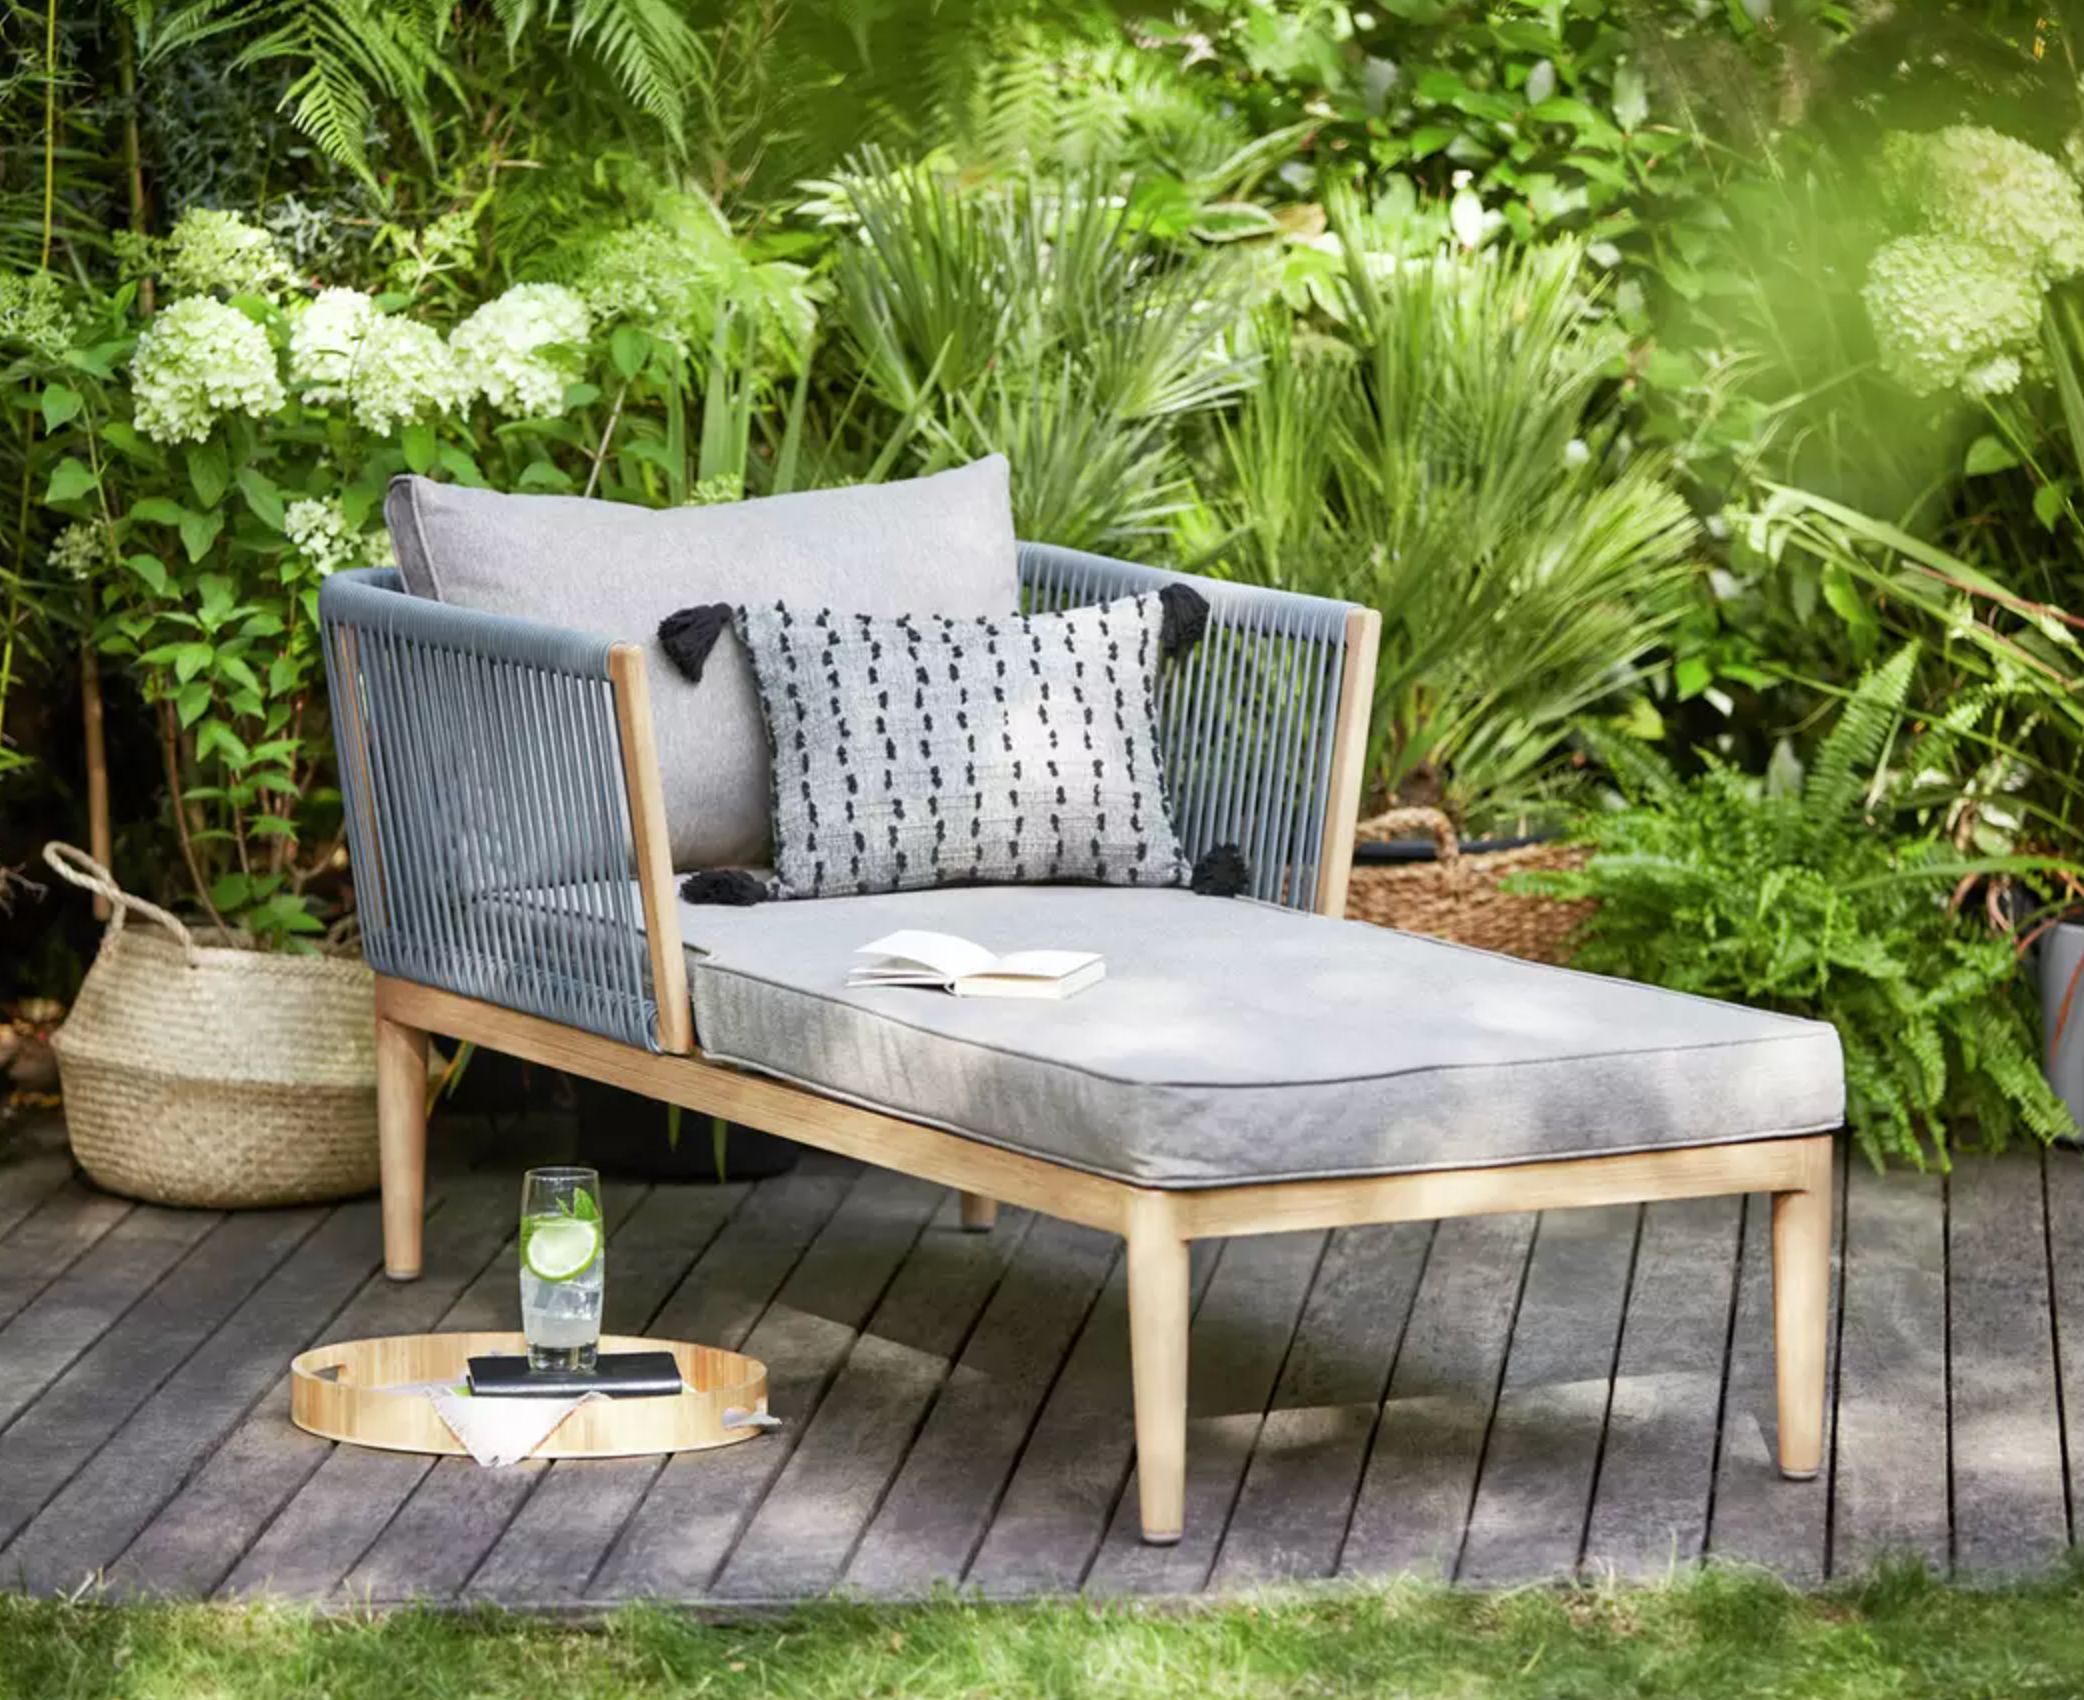 Great Garden Furniture Ideas for Outdoor
  Spaces of all Sizes